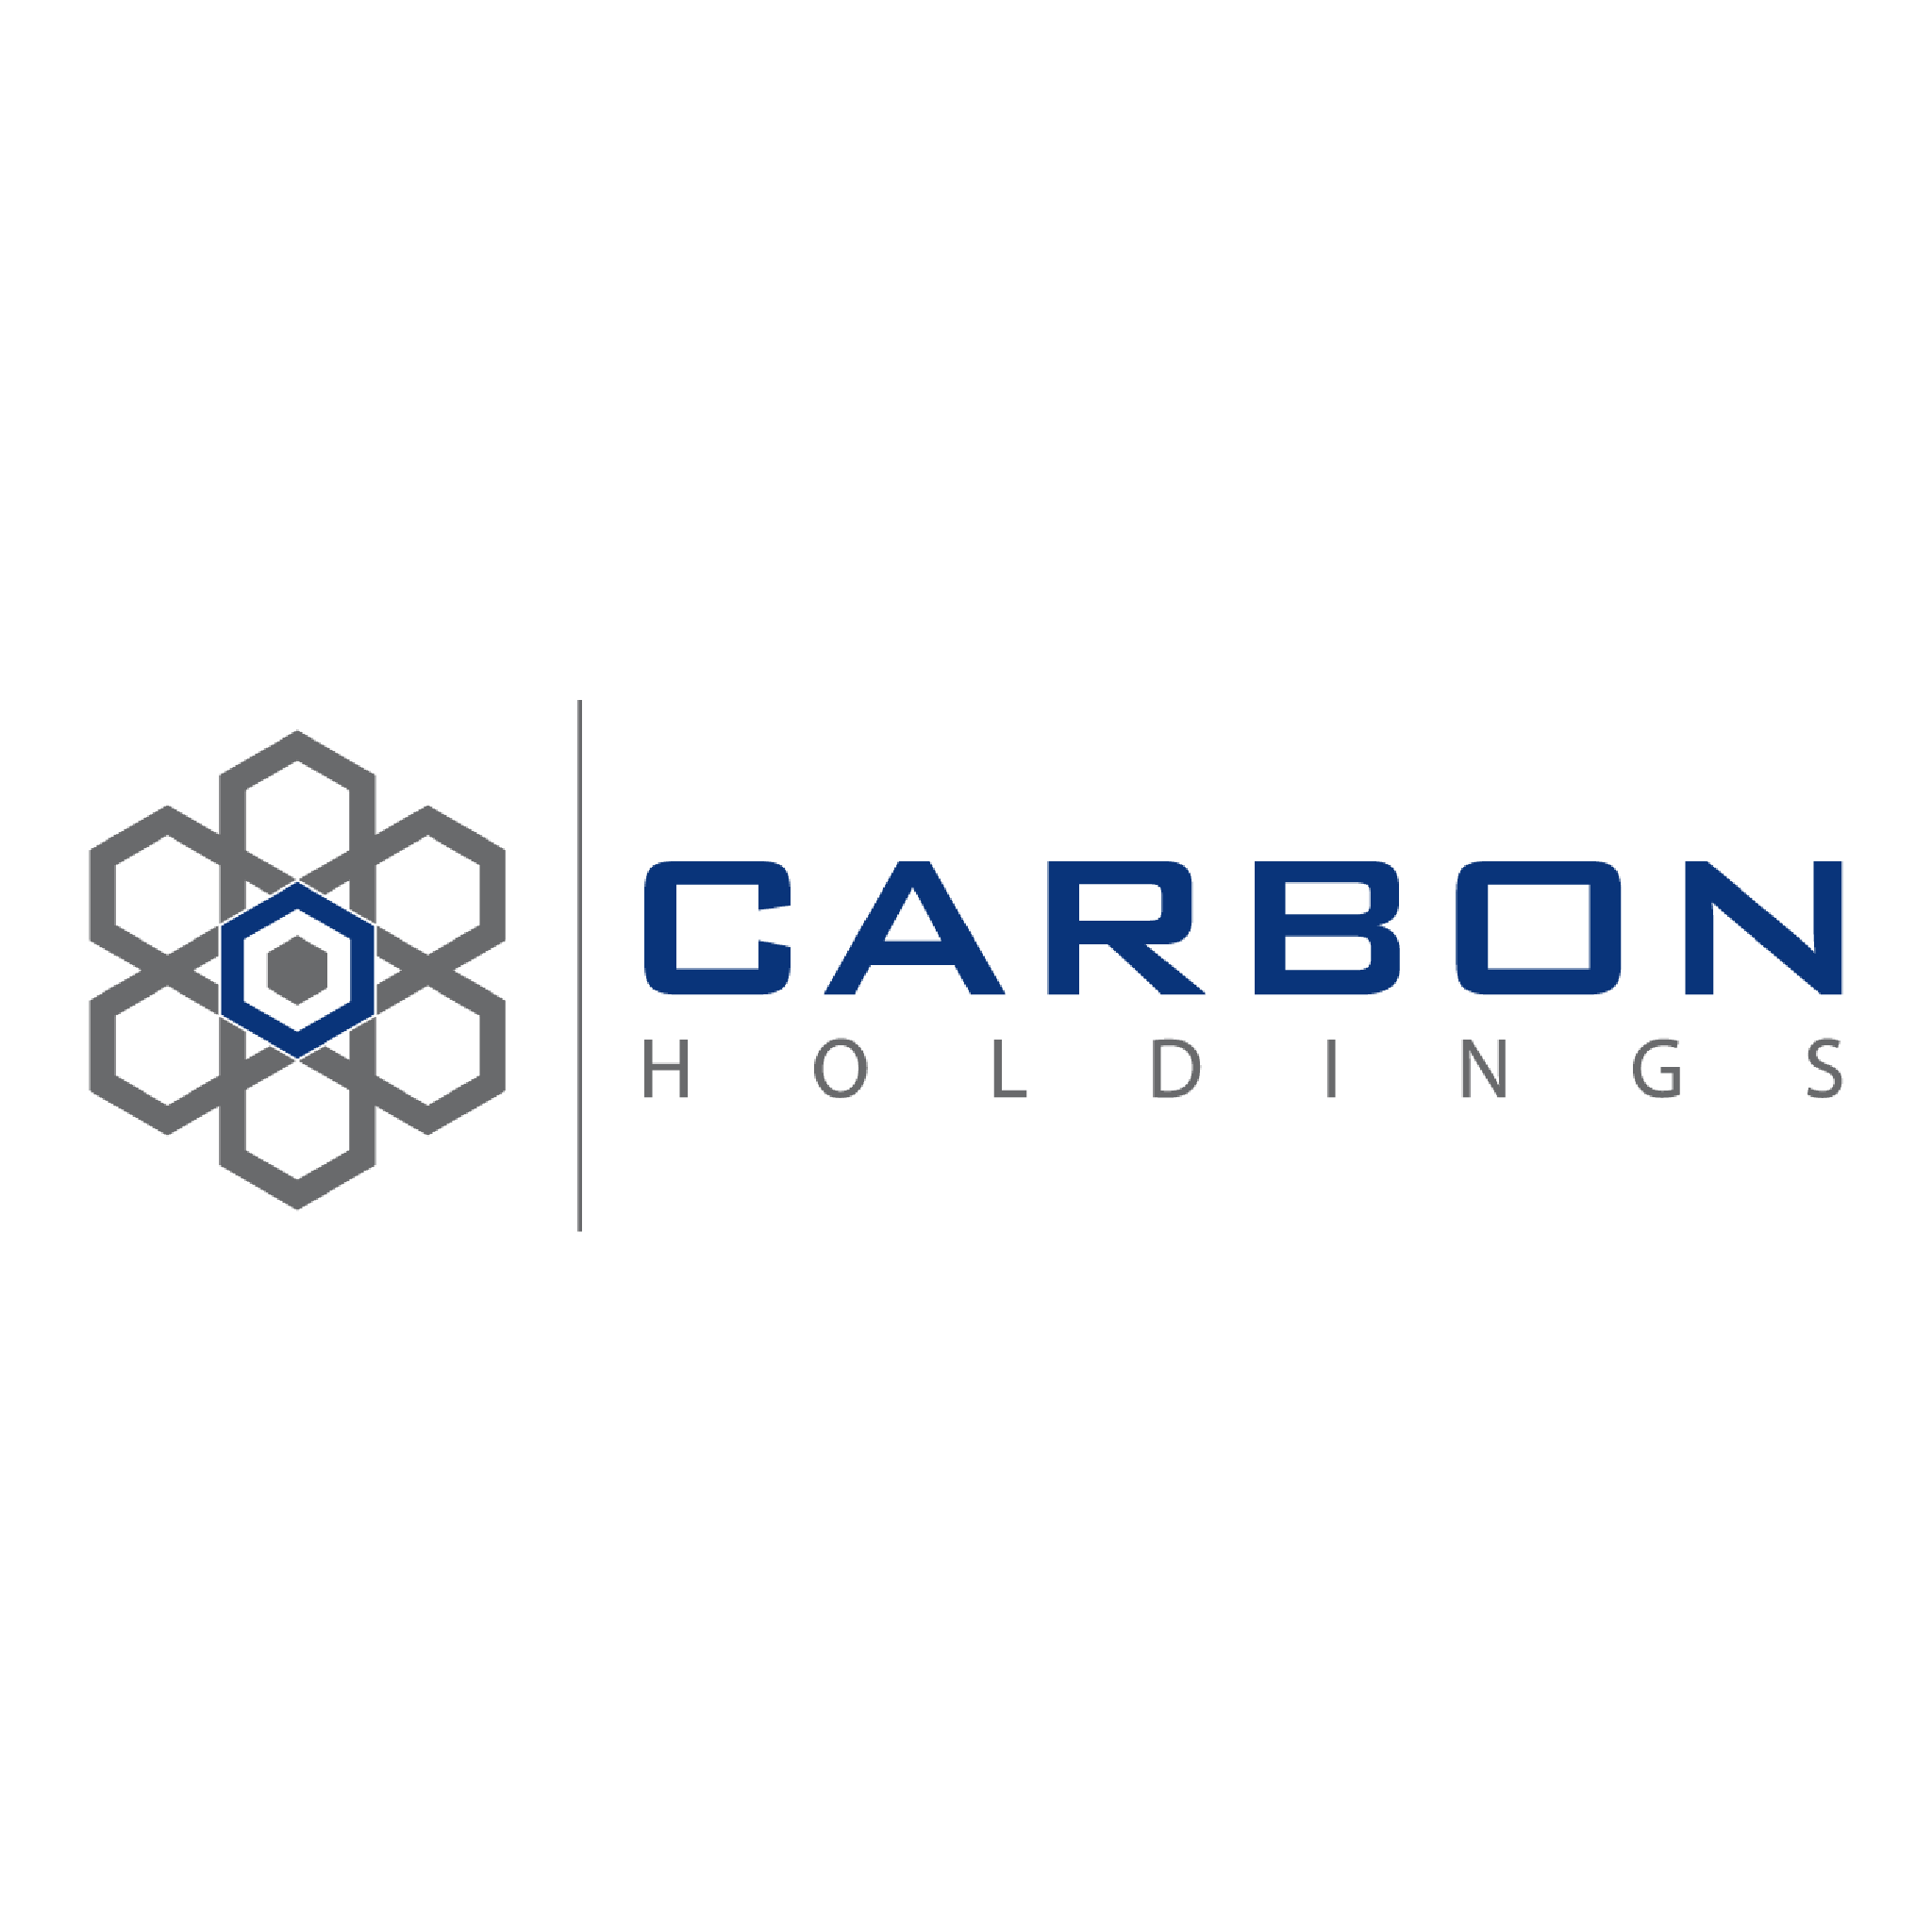 CARBON Holdings